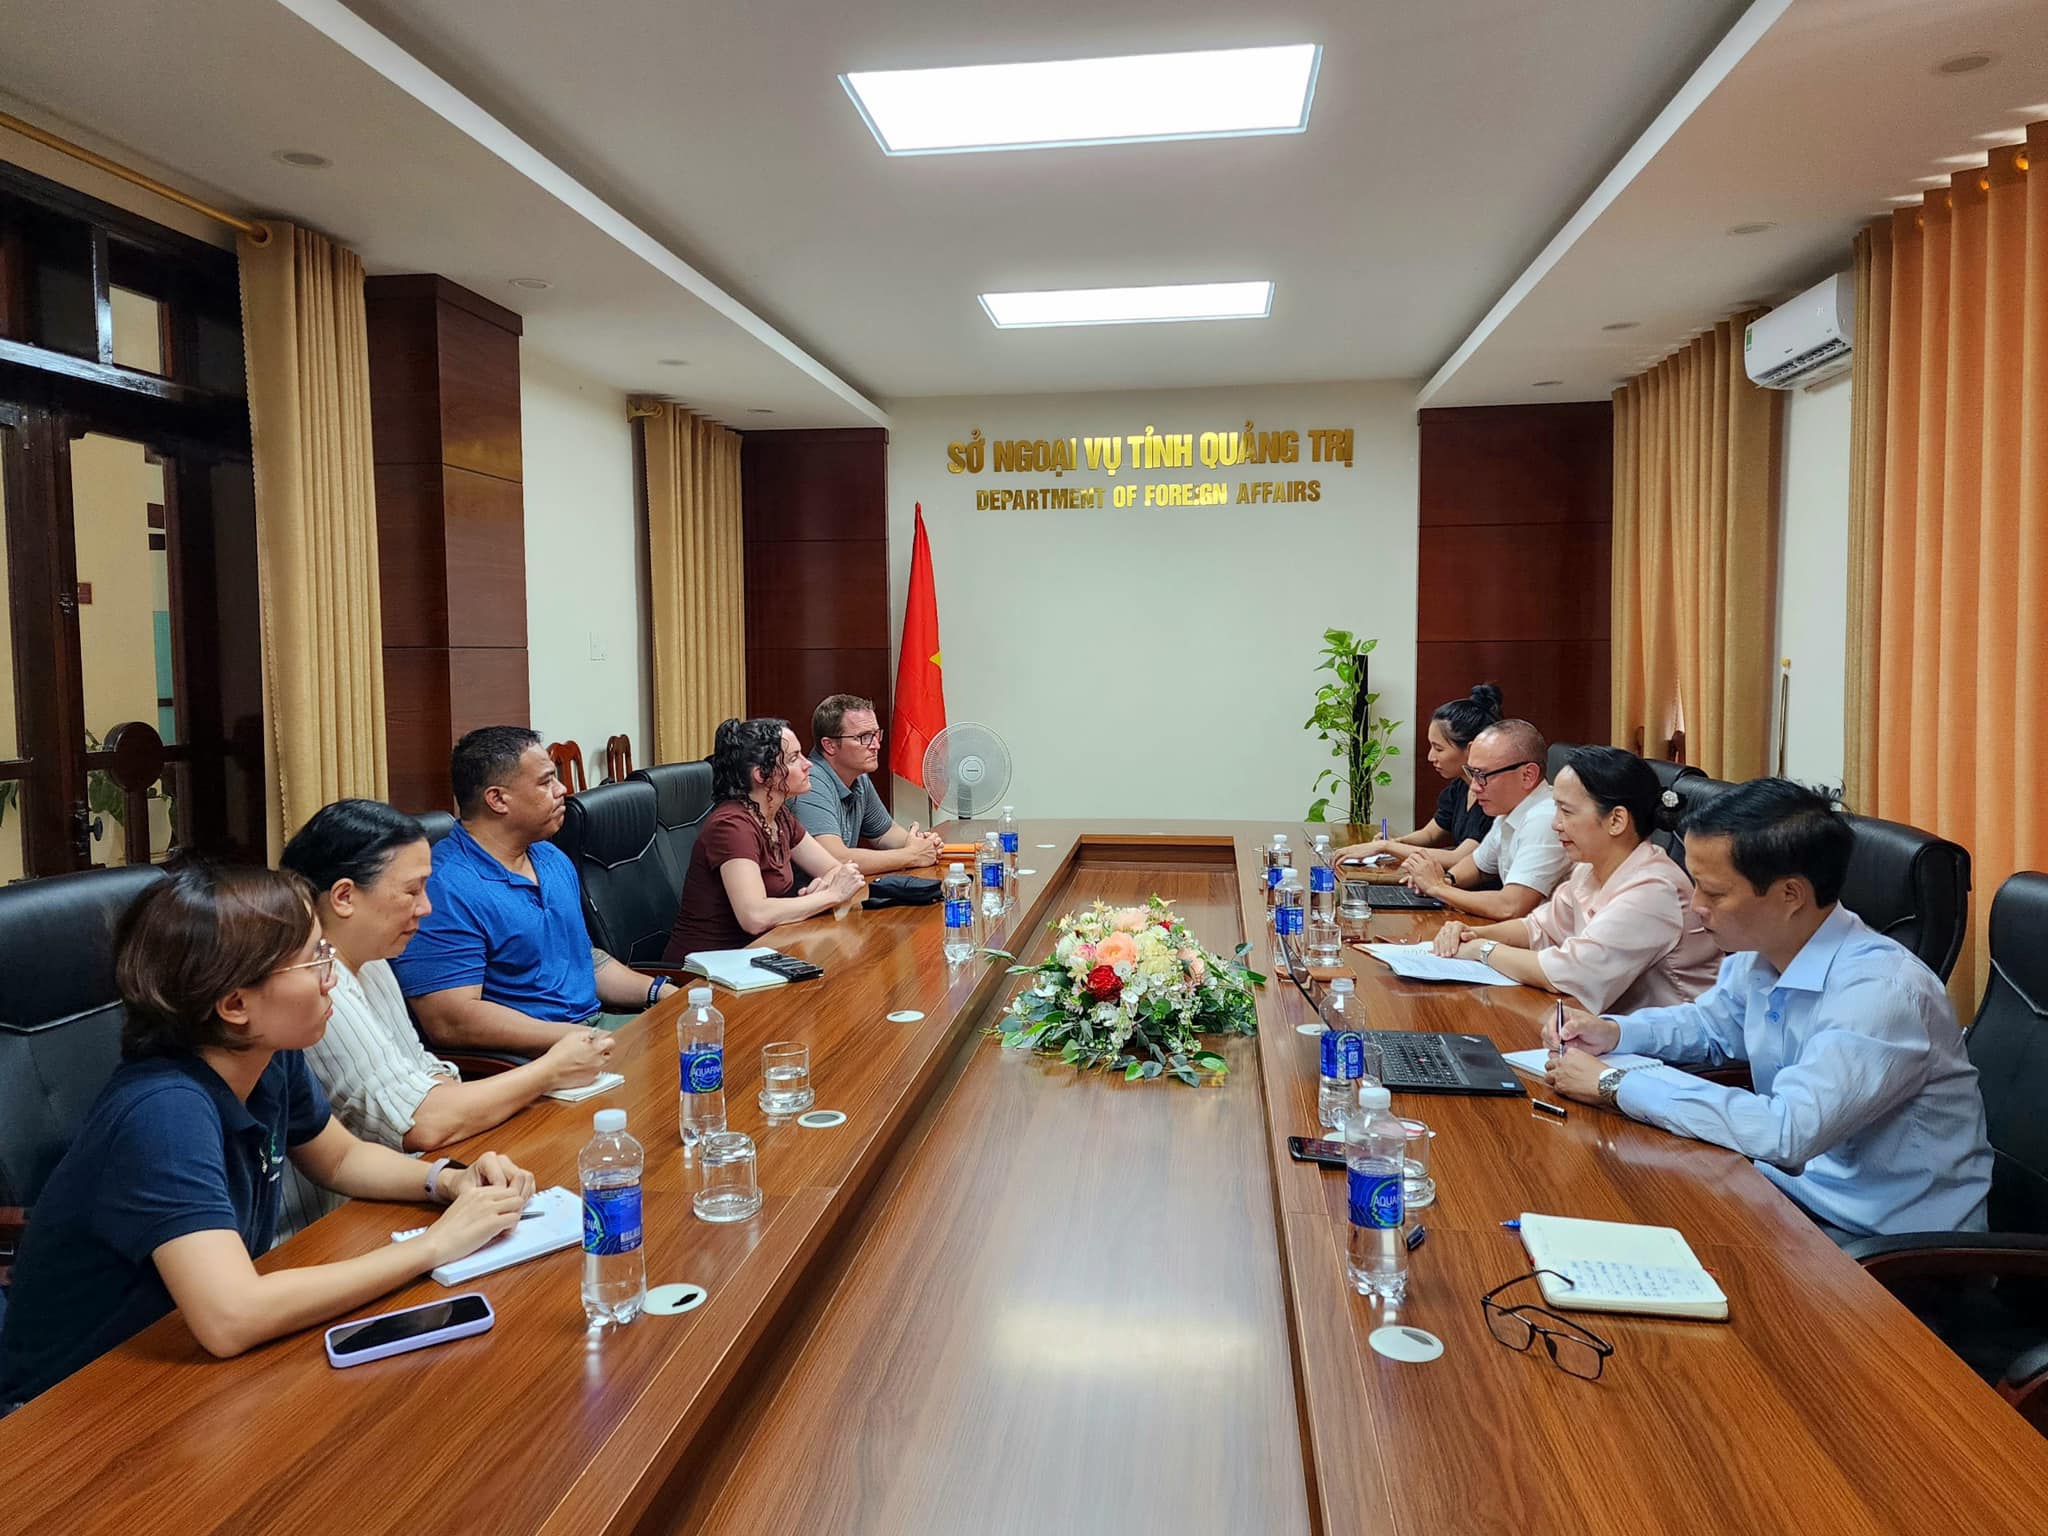 Quang Tri Department of Foreign Affairs welcomed and worked with the delegation of the US Office of Defense Cooperation (ODC)